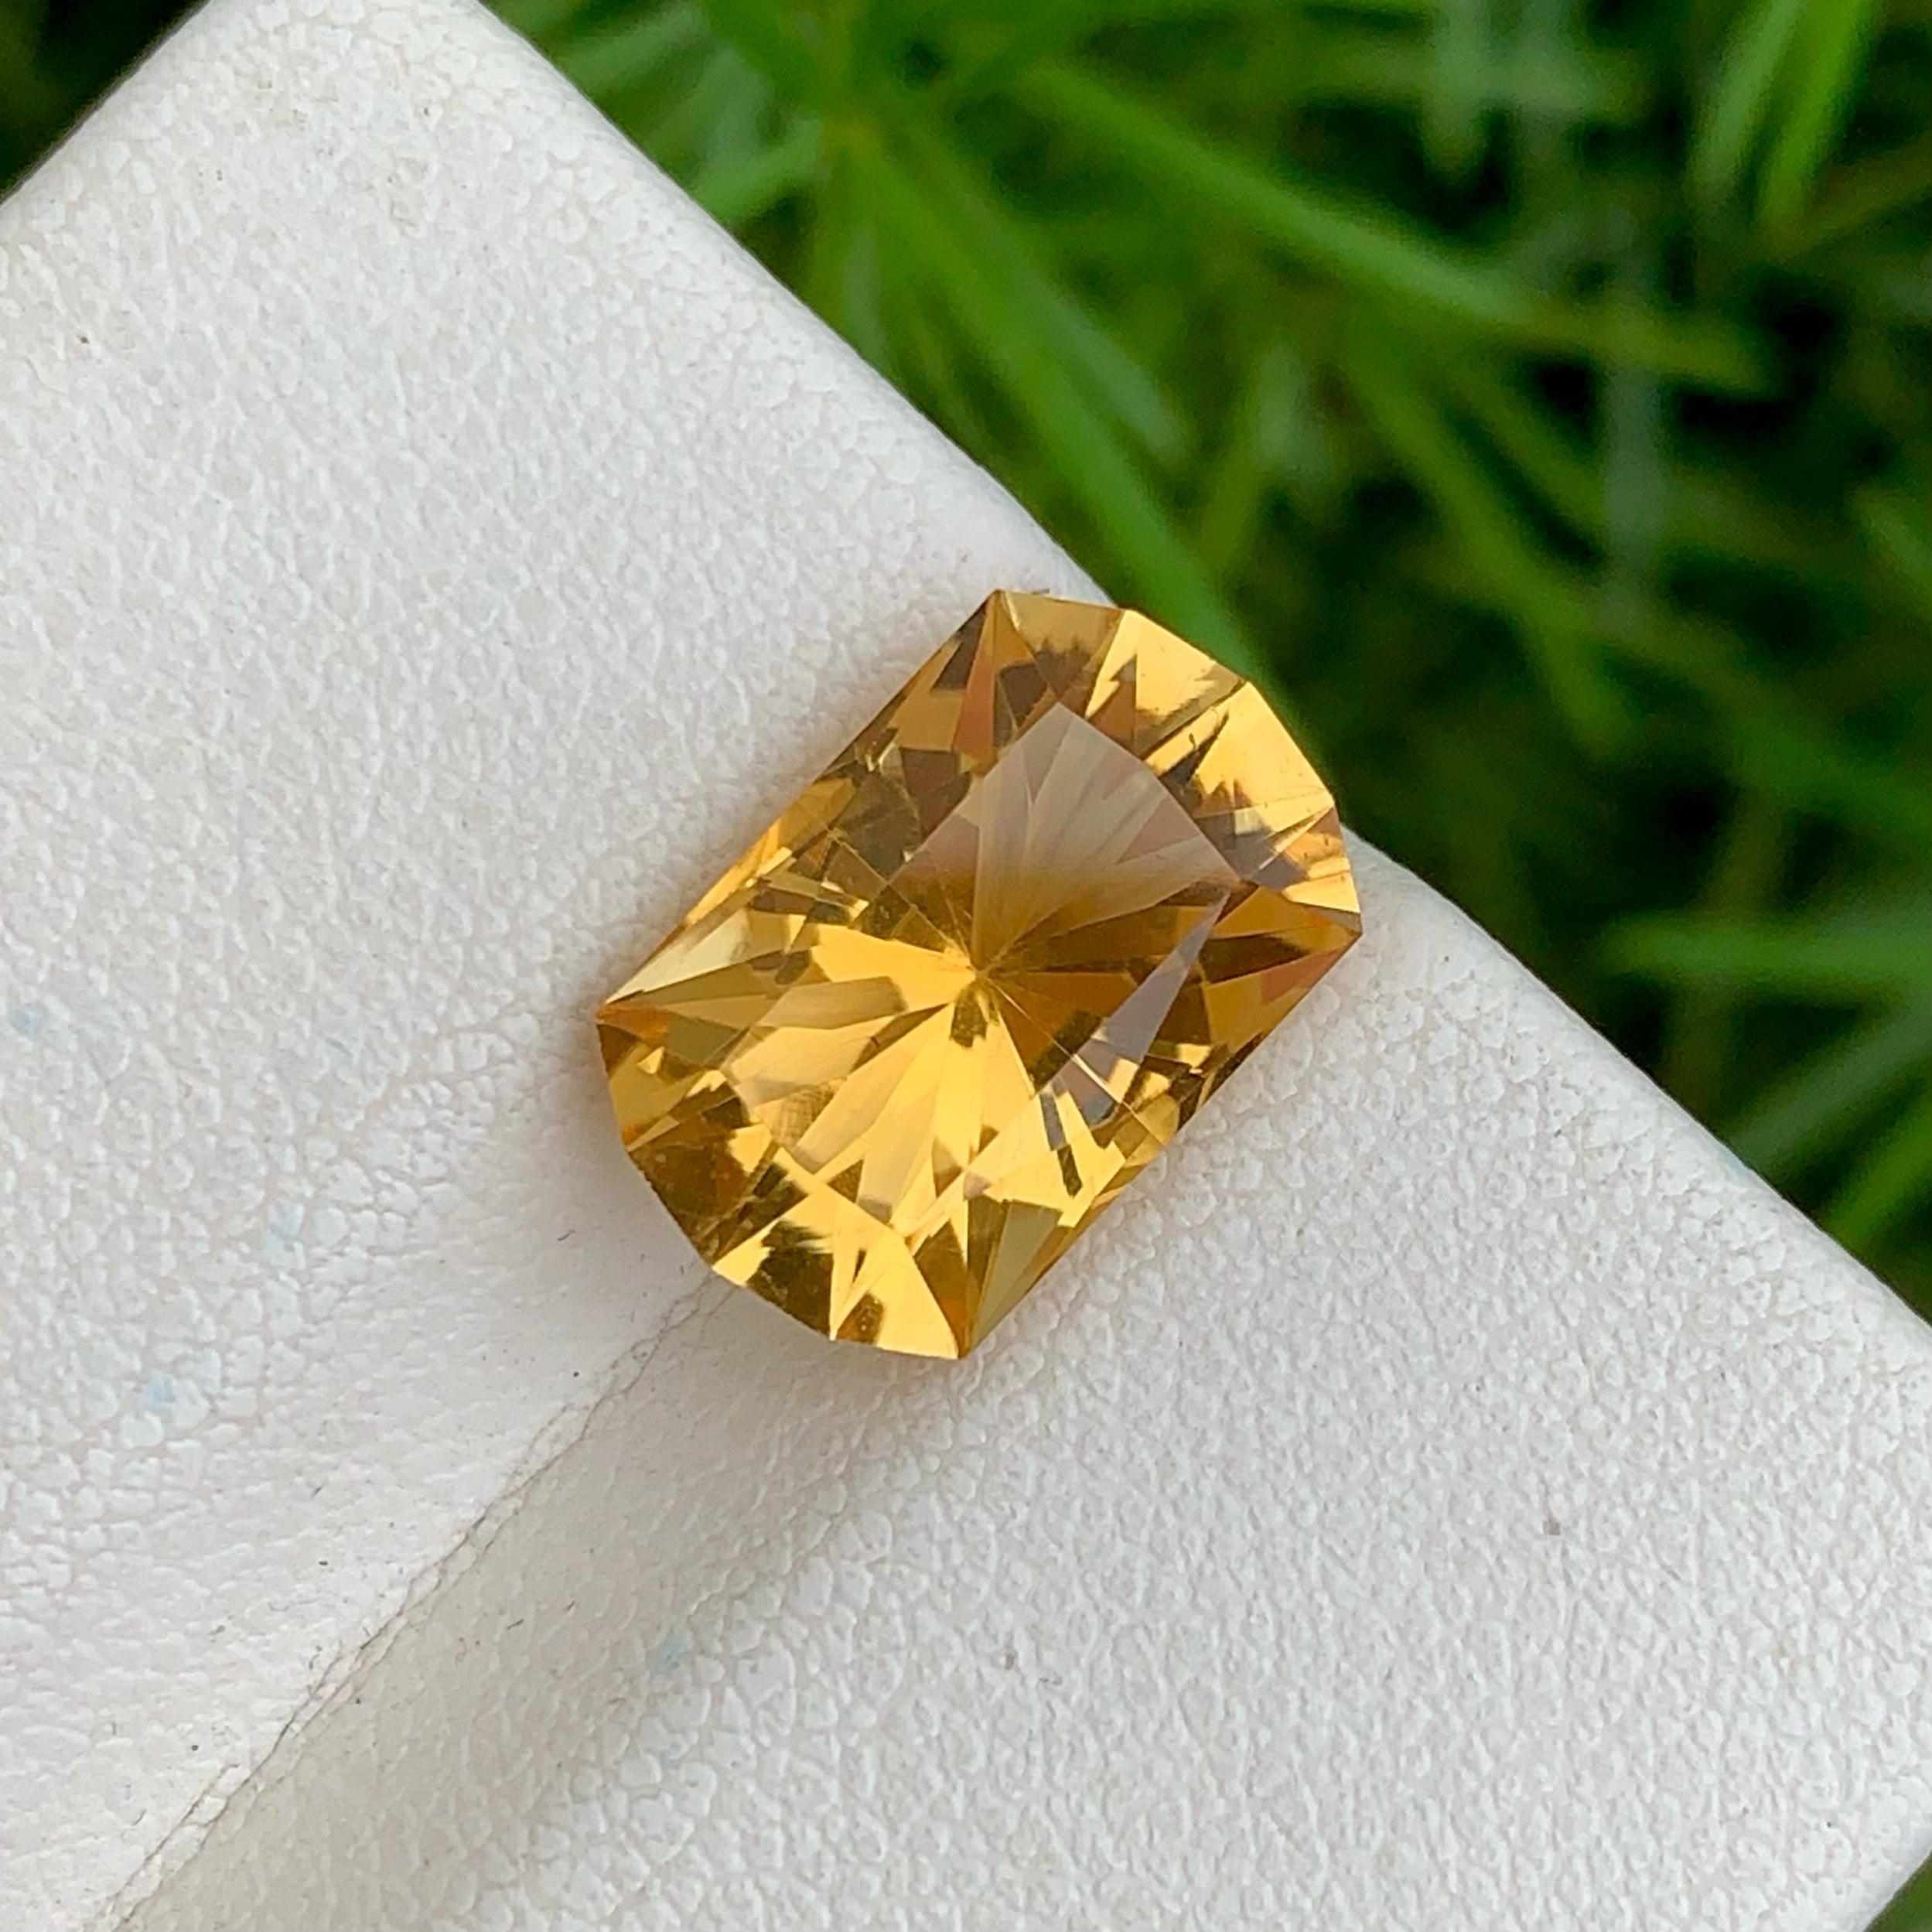 Marvelous Natural Yellow Citrine Gemstone of 4.30 carats from Africa has a wonderful cut in a Custom shape, incredible Yellow color. Great brilliance. This gem is totally Eye Clean.

Product Information:
GEMSTONE TYPE:	Marvelous Natural Yellow